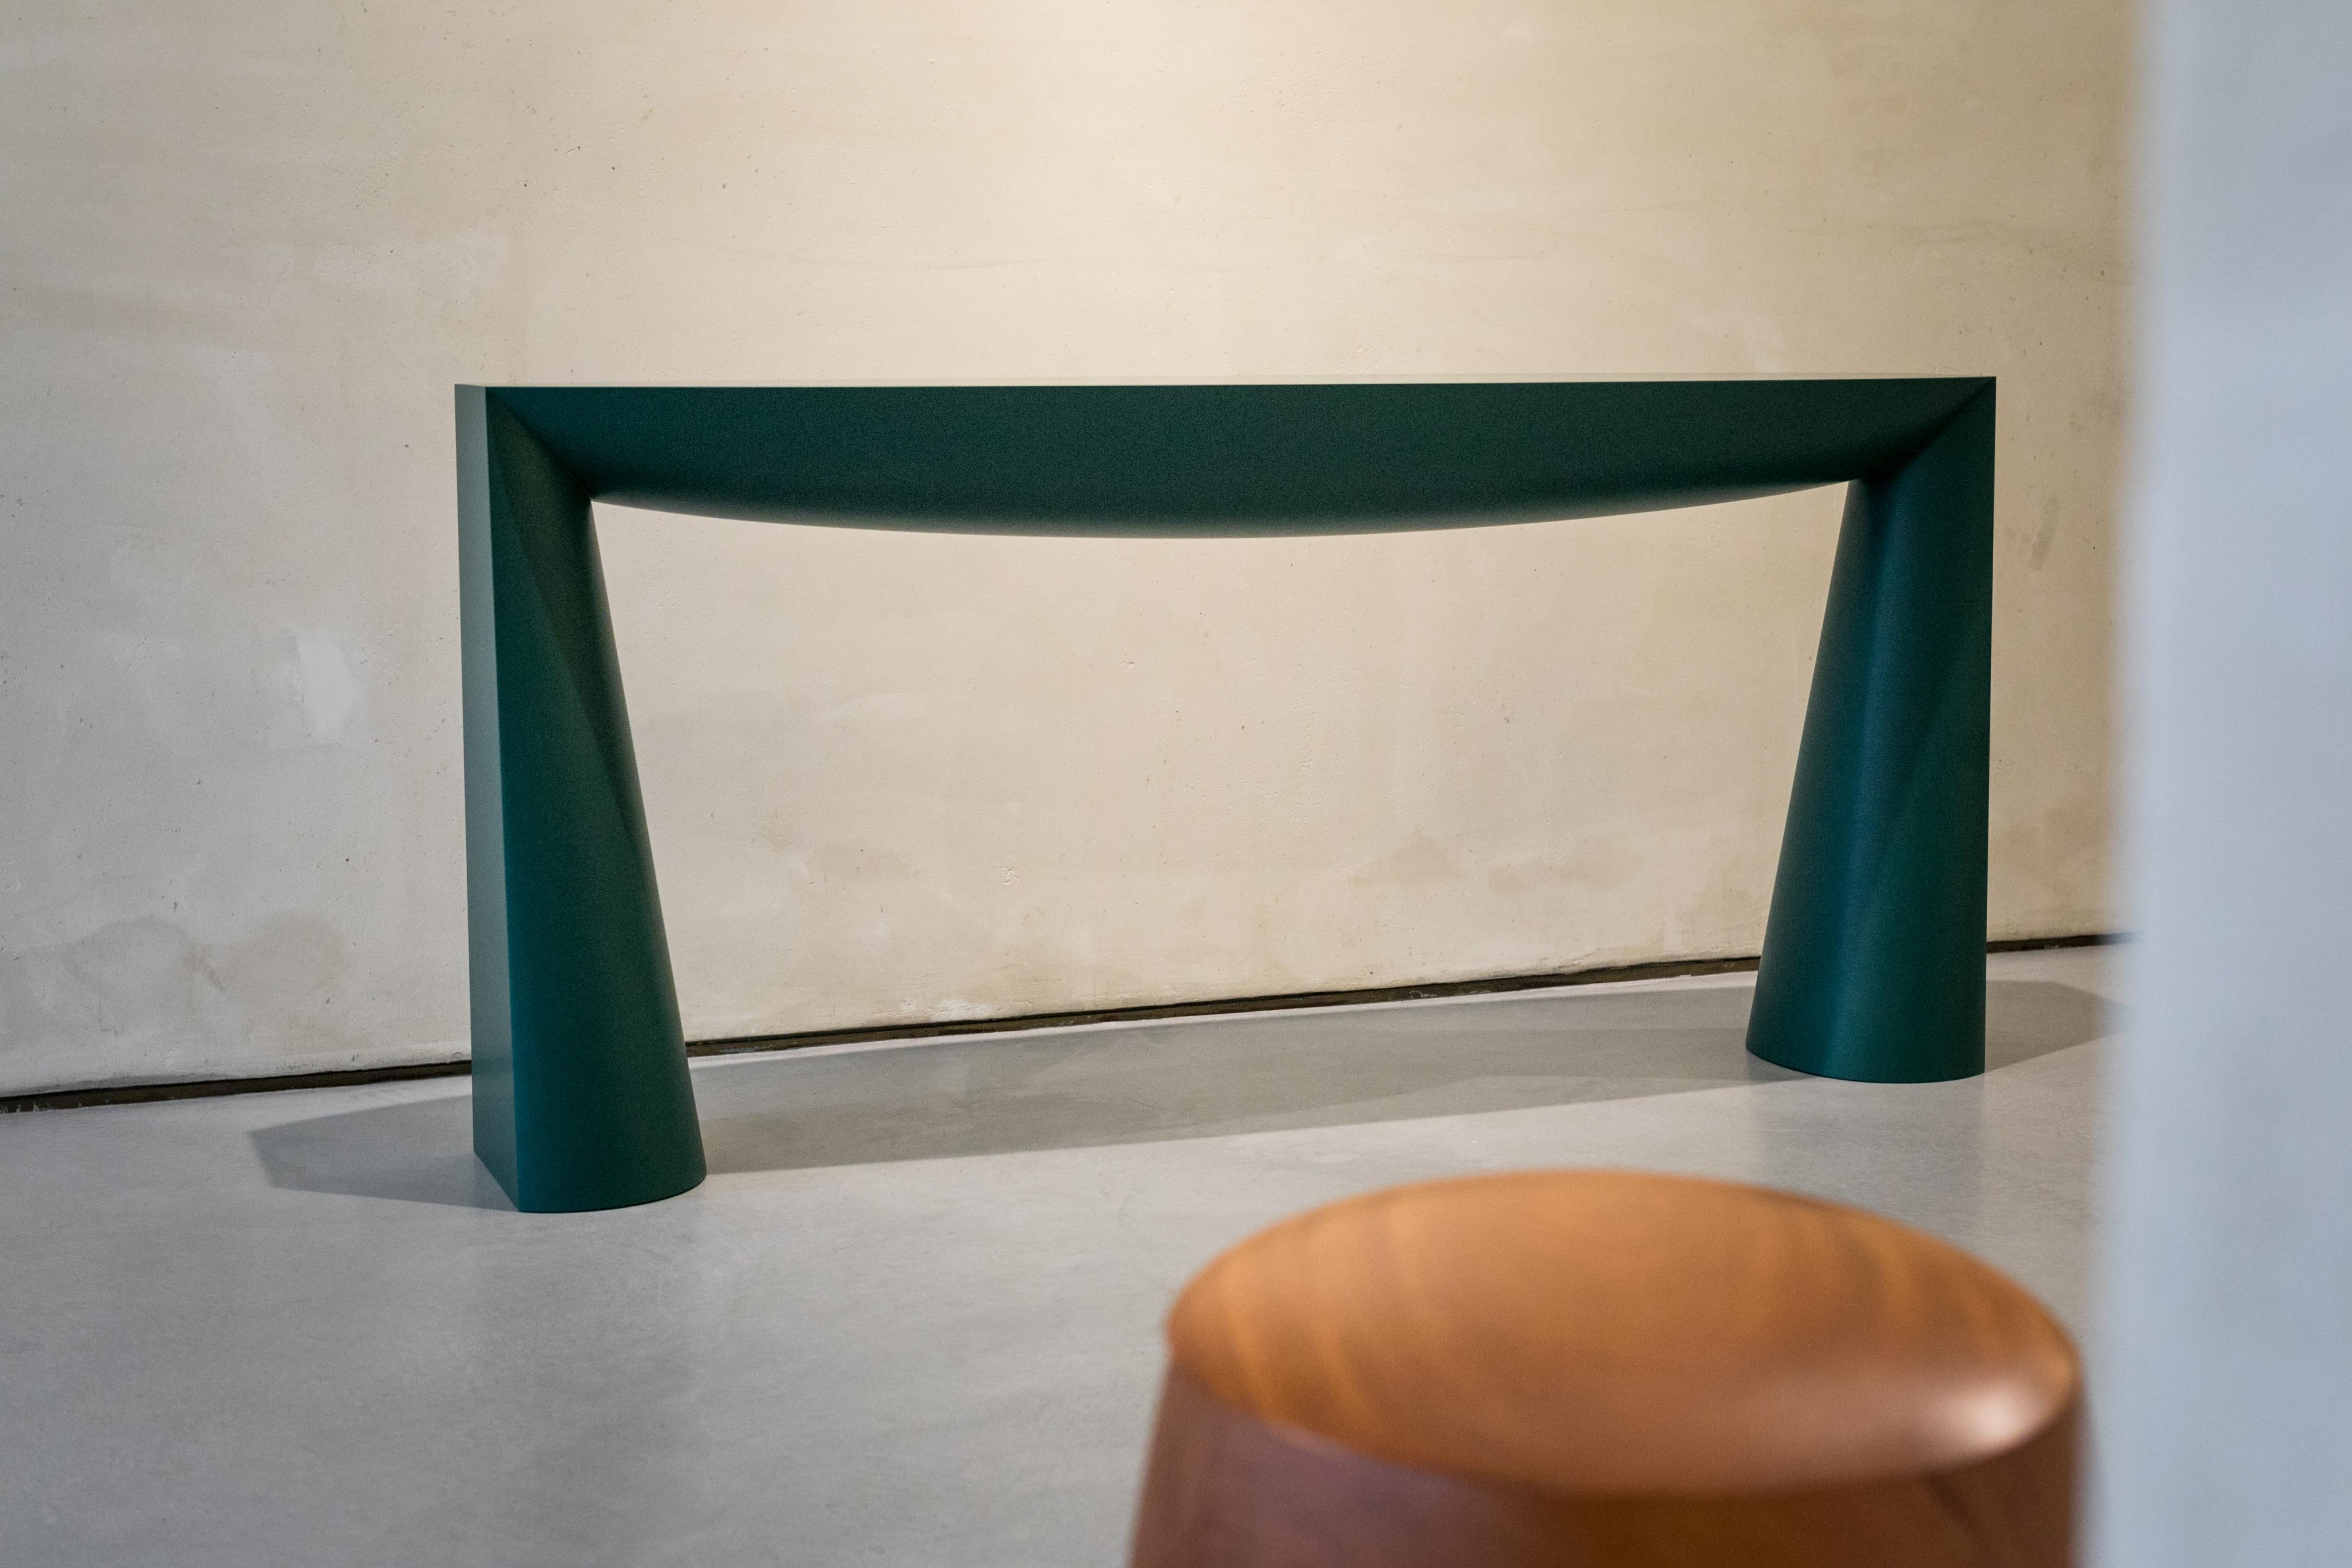 Limited Green Edition of 8

Edition n°1 available

First exhibited at the Galerie Vidid in Rotterdam, the Console table of Aldo Bakker depicts the simplest design concept of a table: two legs and a surface. The legs are an elongation of the line